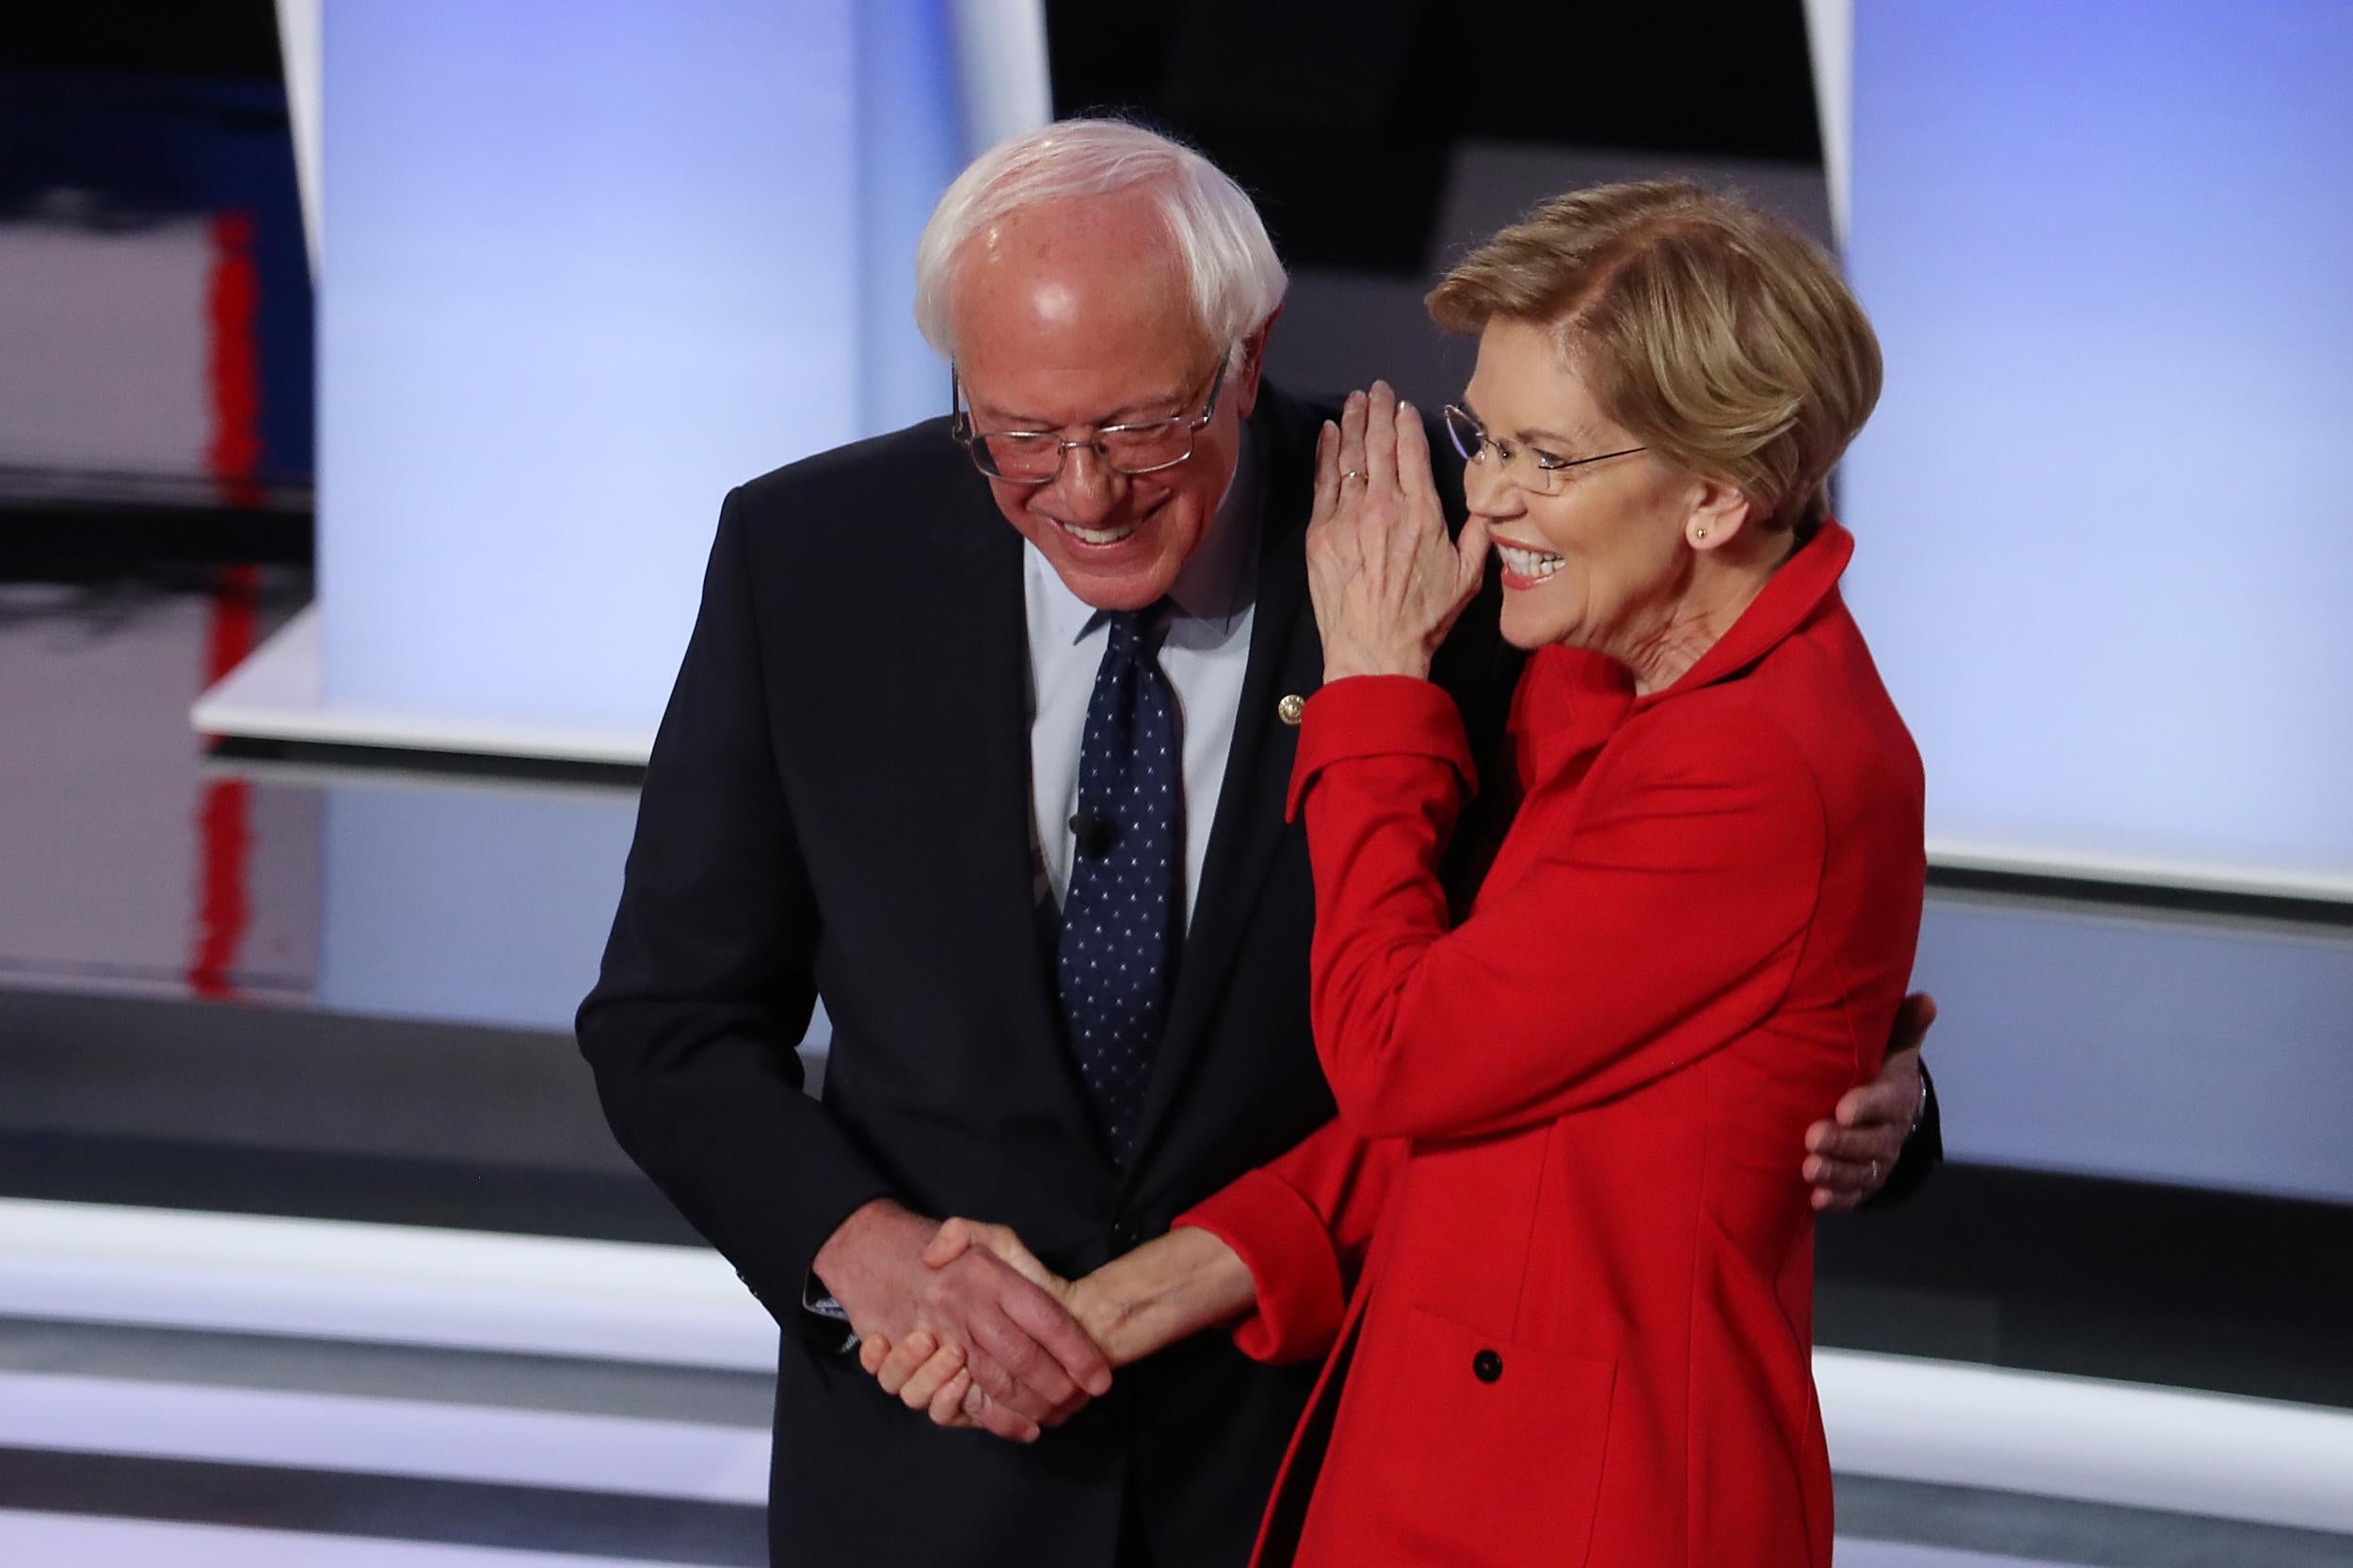 A Warren-Sanders ticket would be an unmitigated disaster